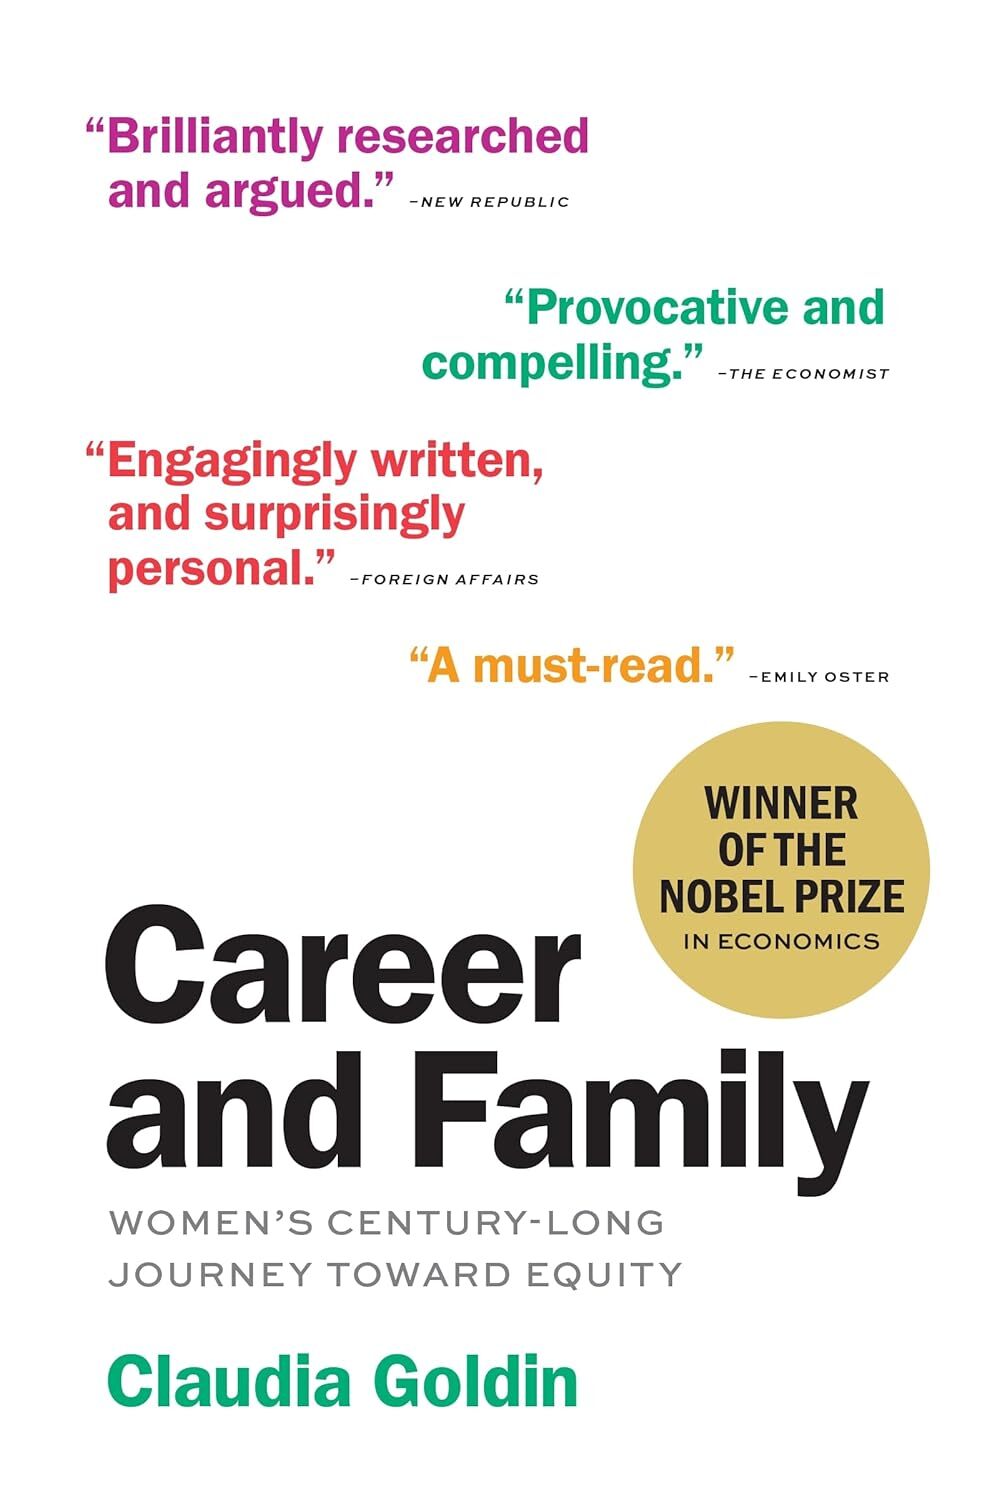 Book cover: "Career and Family."